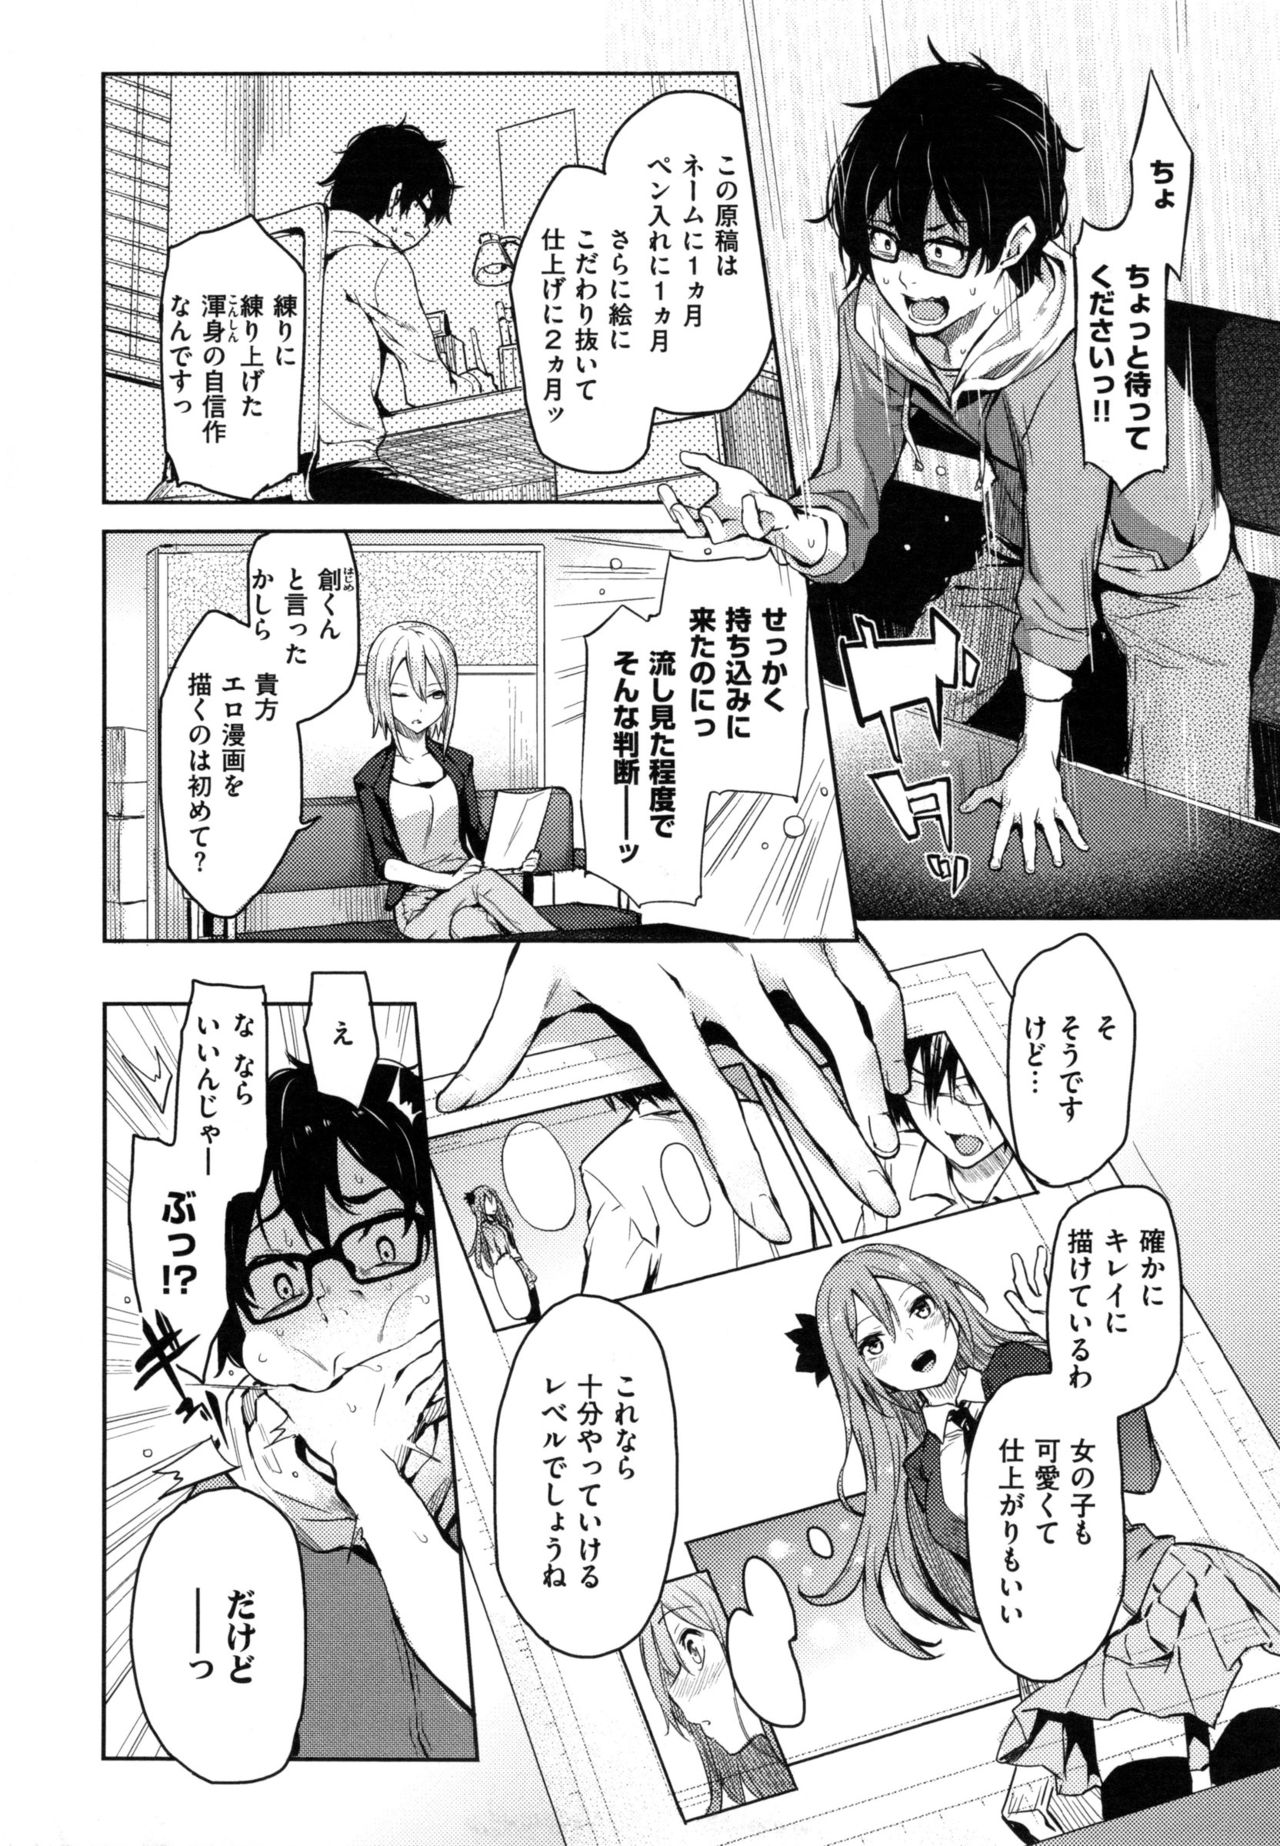 [Michiking] Shujuu Ecstasy - Sexual Relation of Master and Servant.  - page 33 full